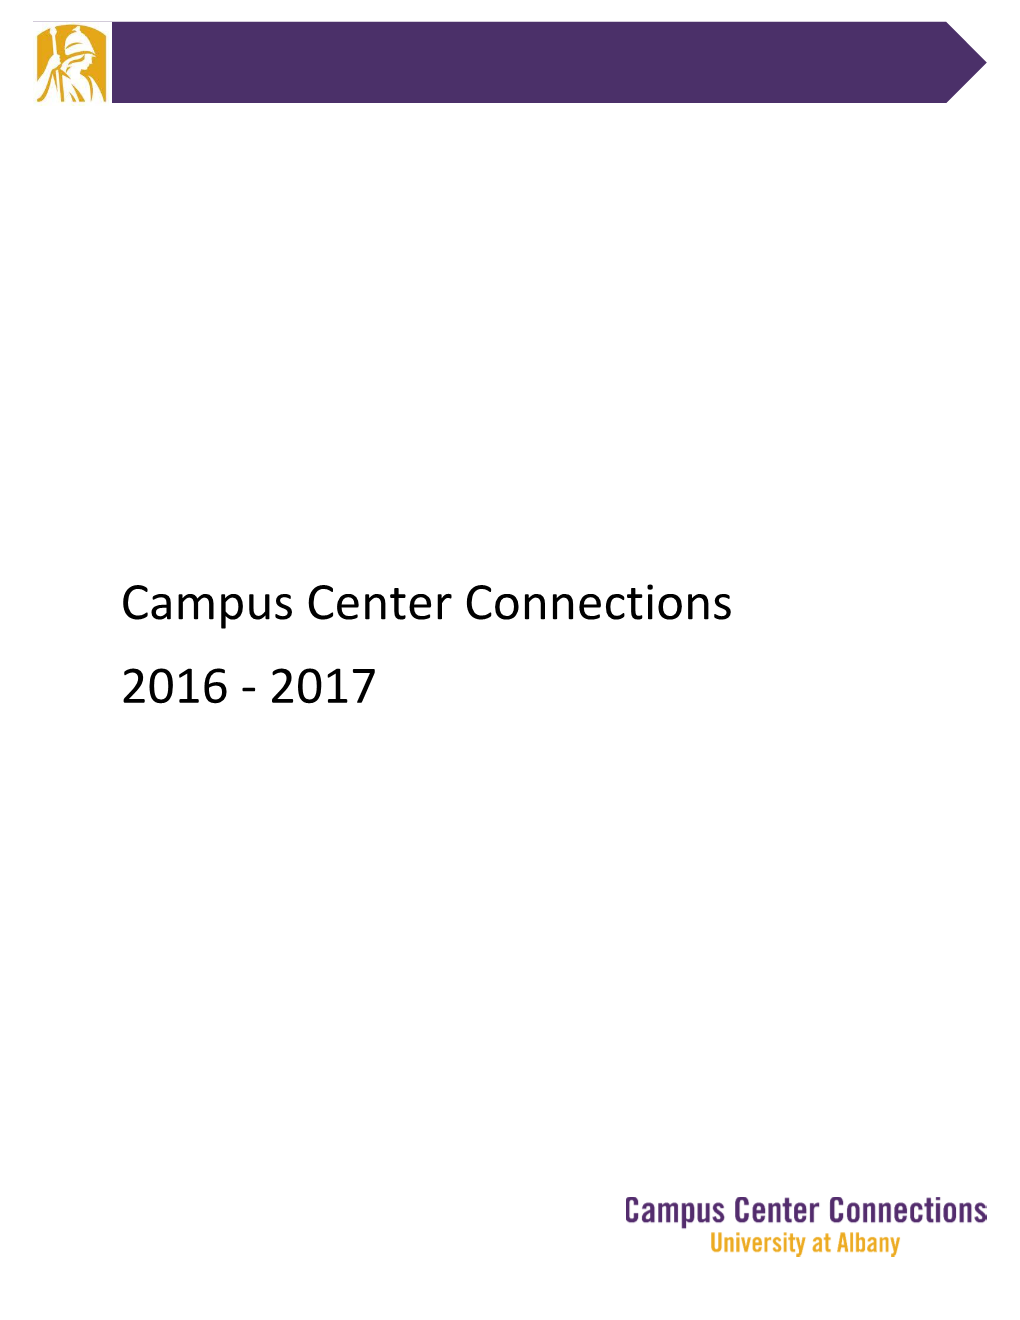 Campus Center Connections 2016 - 2017